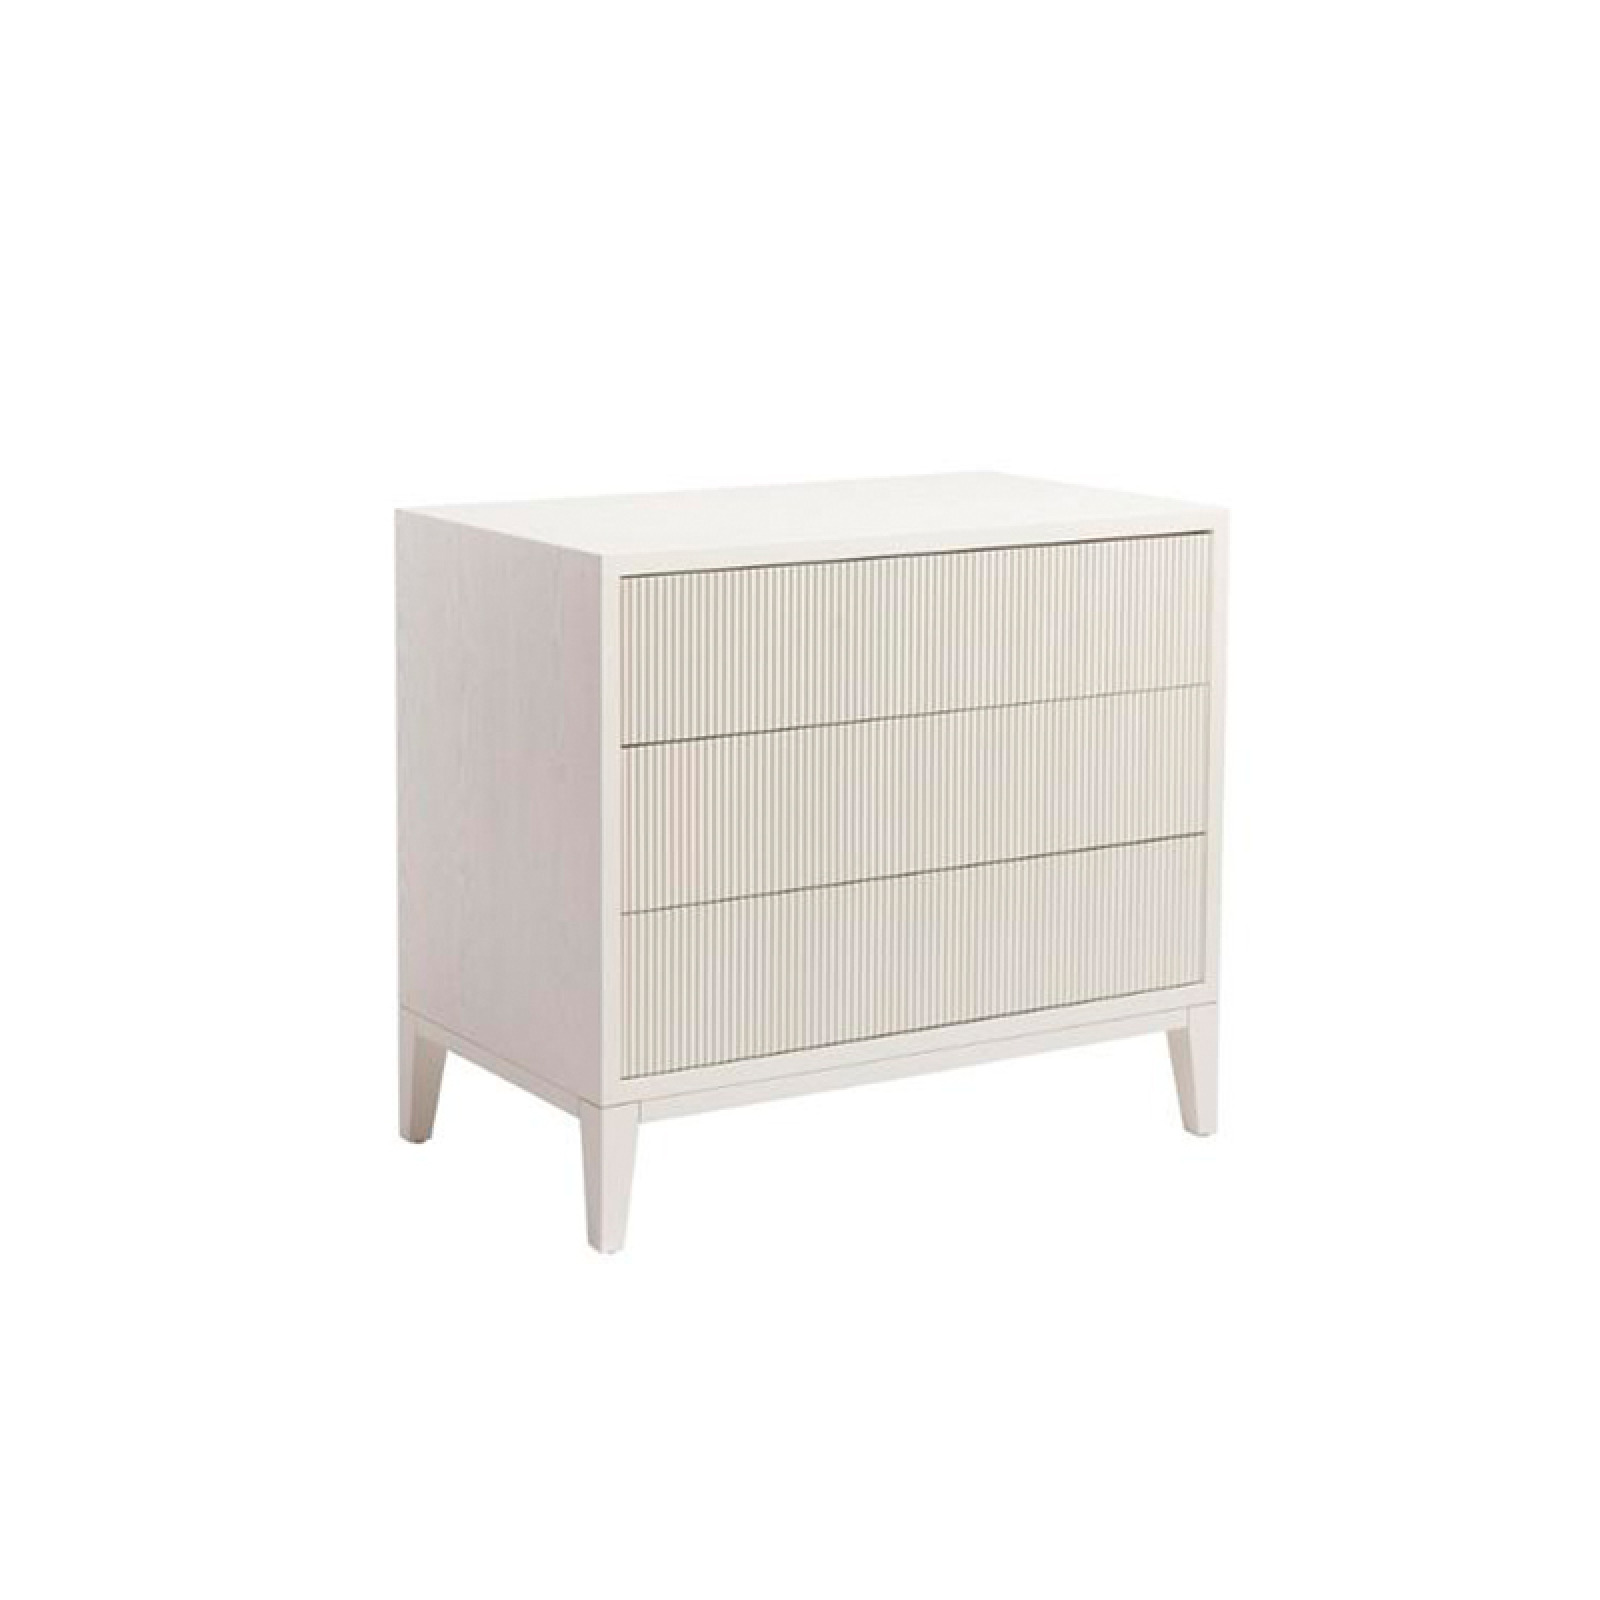 Amur White chest of drawers